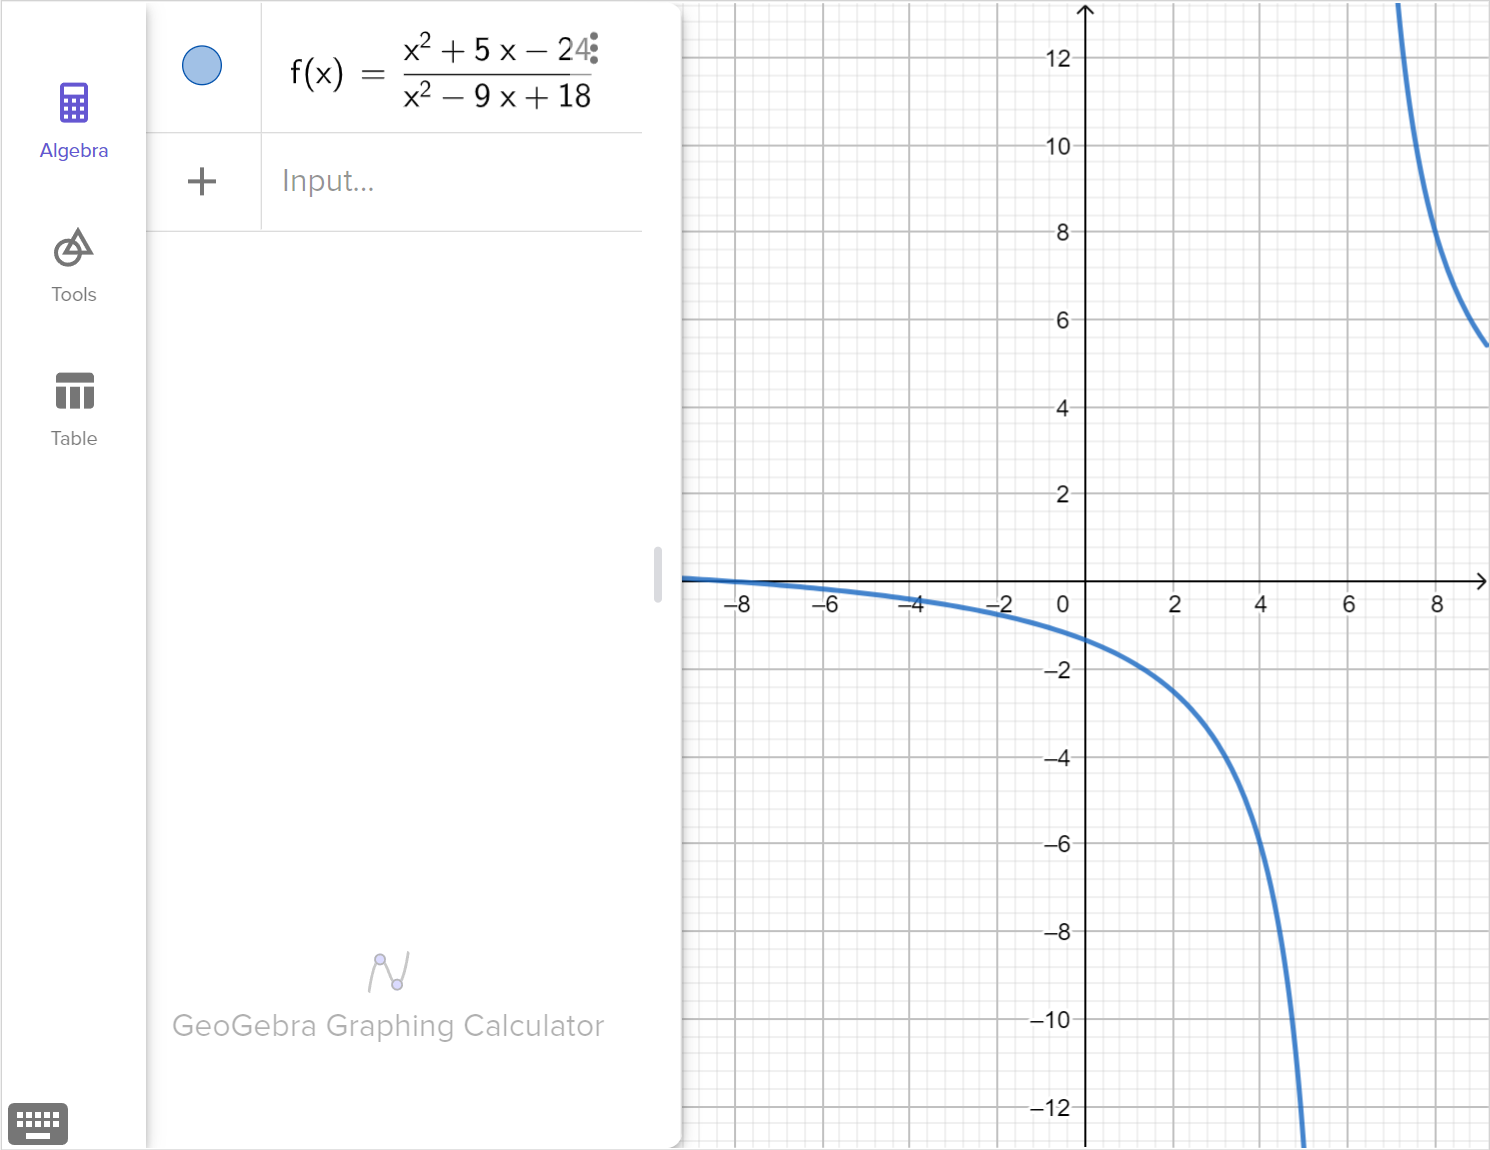 A screenshot of the GeoGebra graphing calculator showing the graph of f of x equals x squared plus 5 x minus 24 all over x squared minus 9 x plus 18. Speak to your teacher for more details.